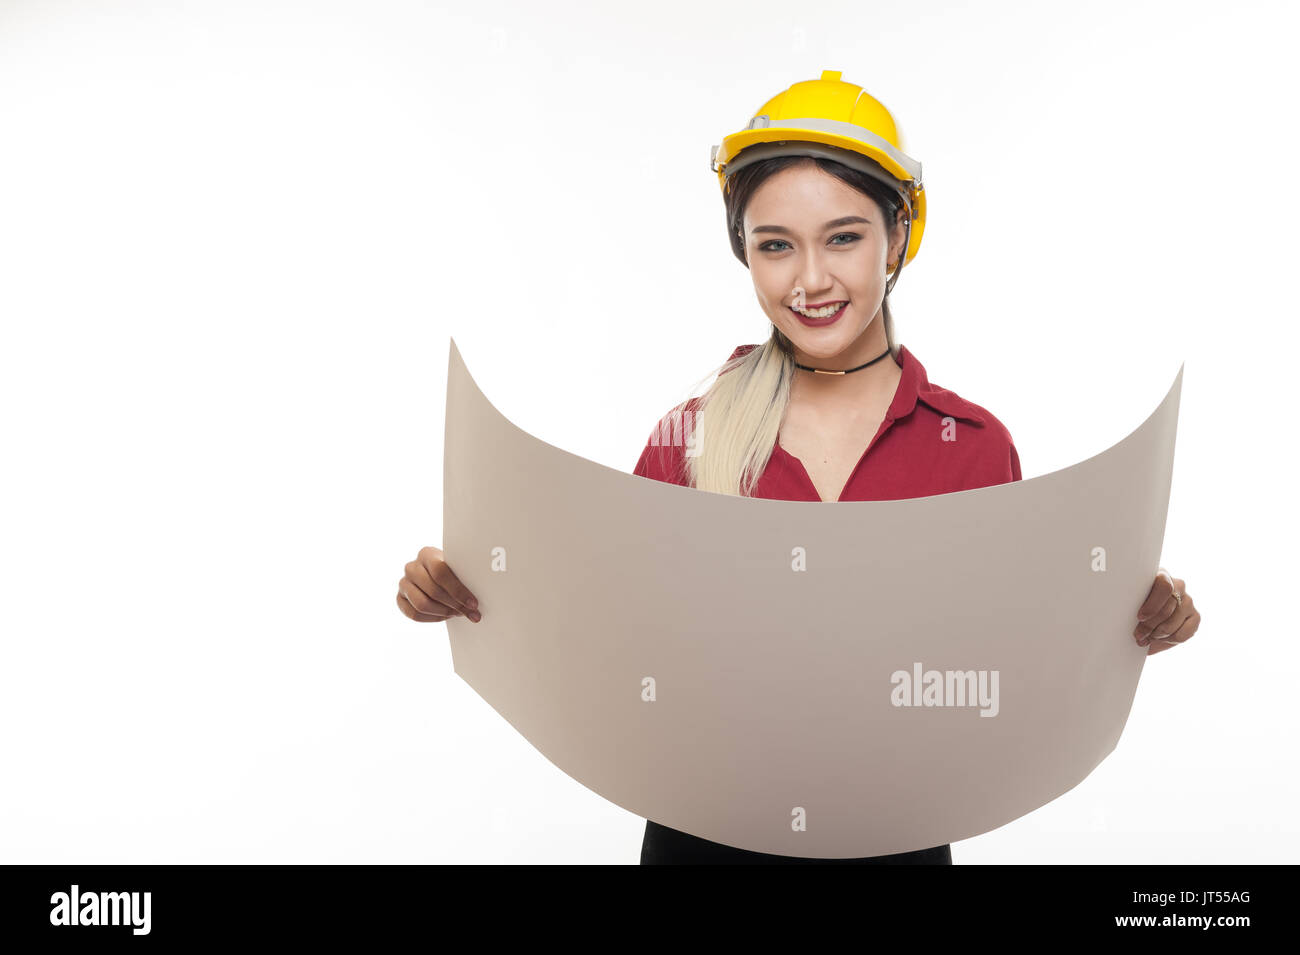 Young Asian woman architect with red shirt and yellow safety helmet smiling while reading blueprints. Industrial occupation people concept Stock Photo